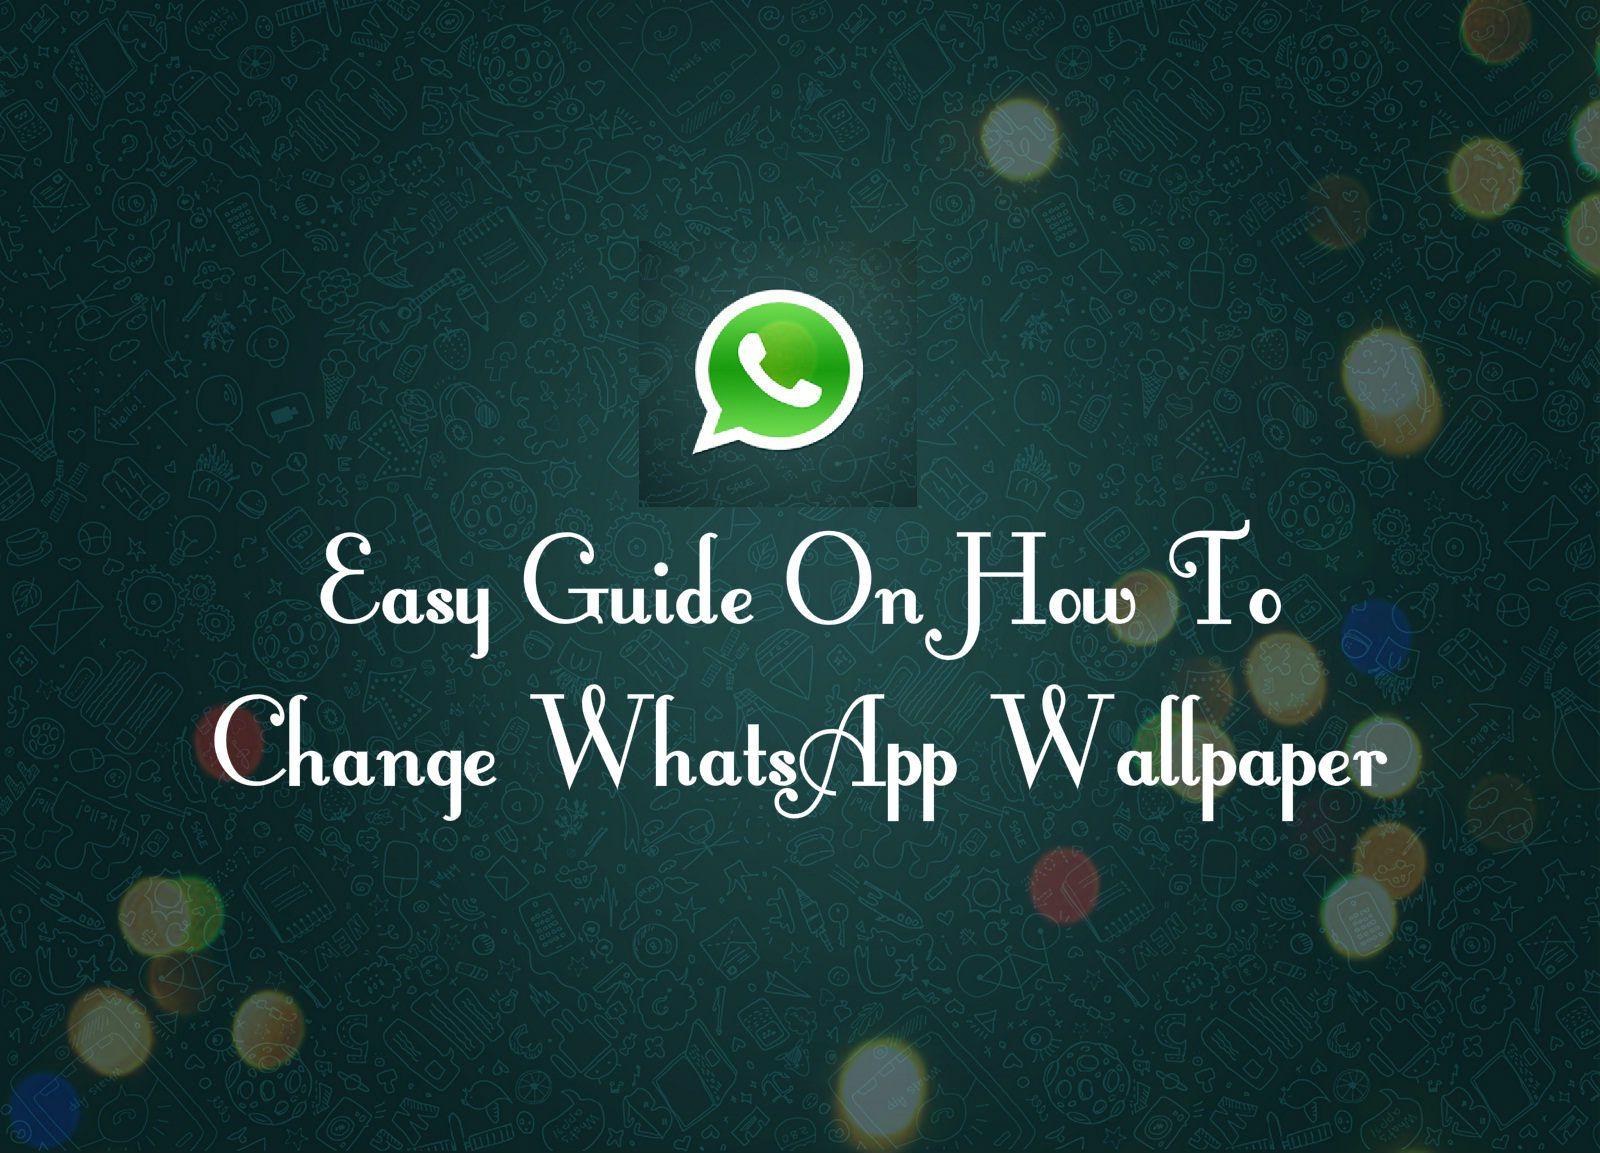 download whatsapp wallpaper package for android